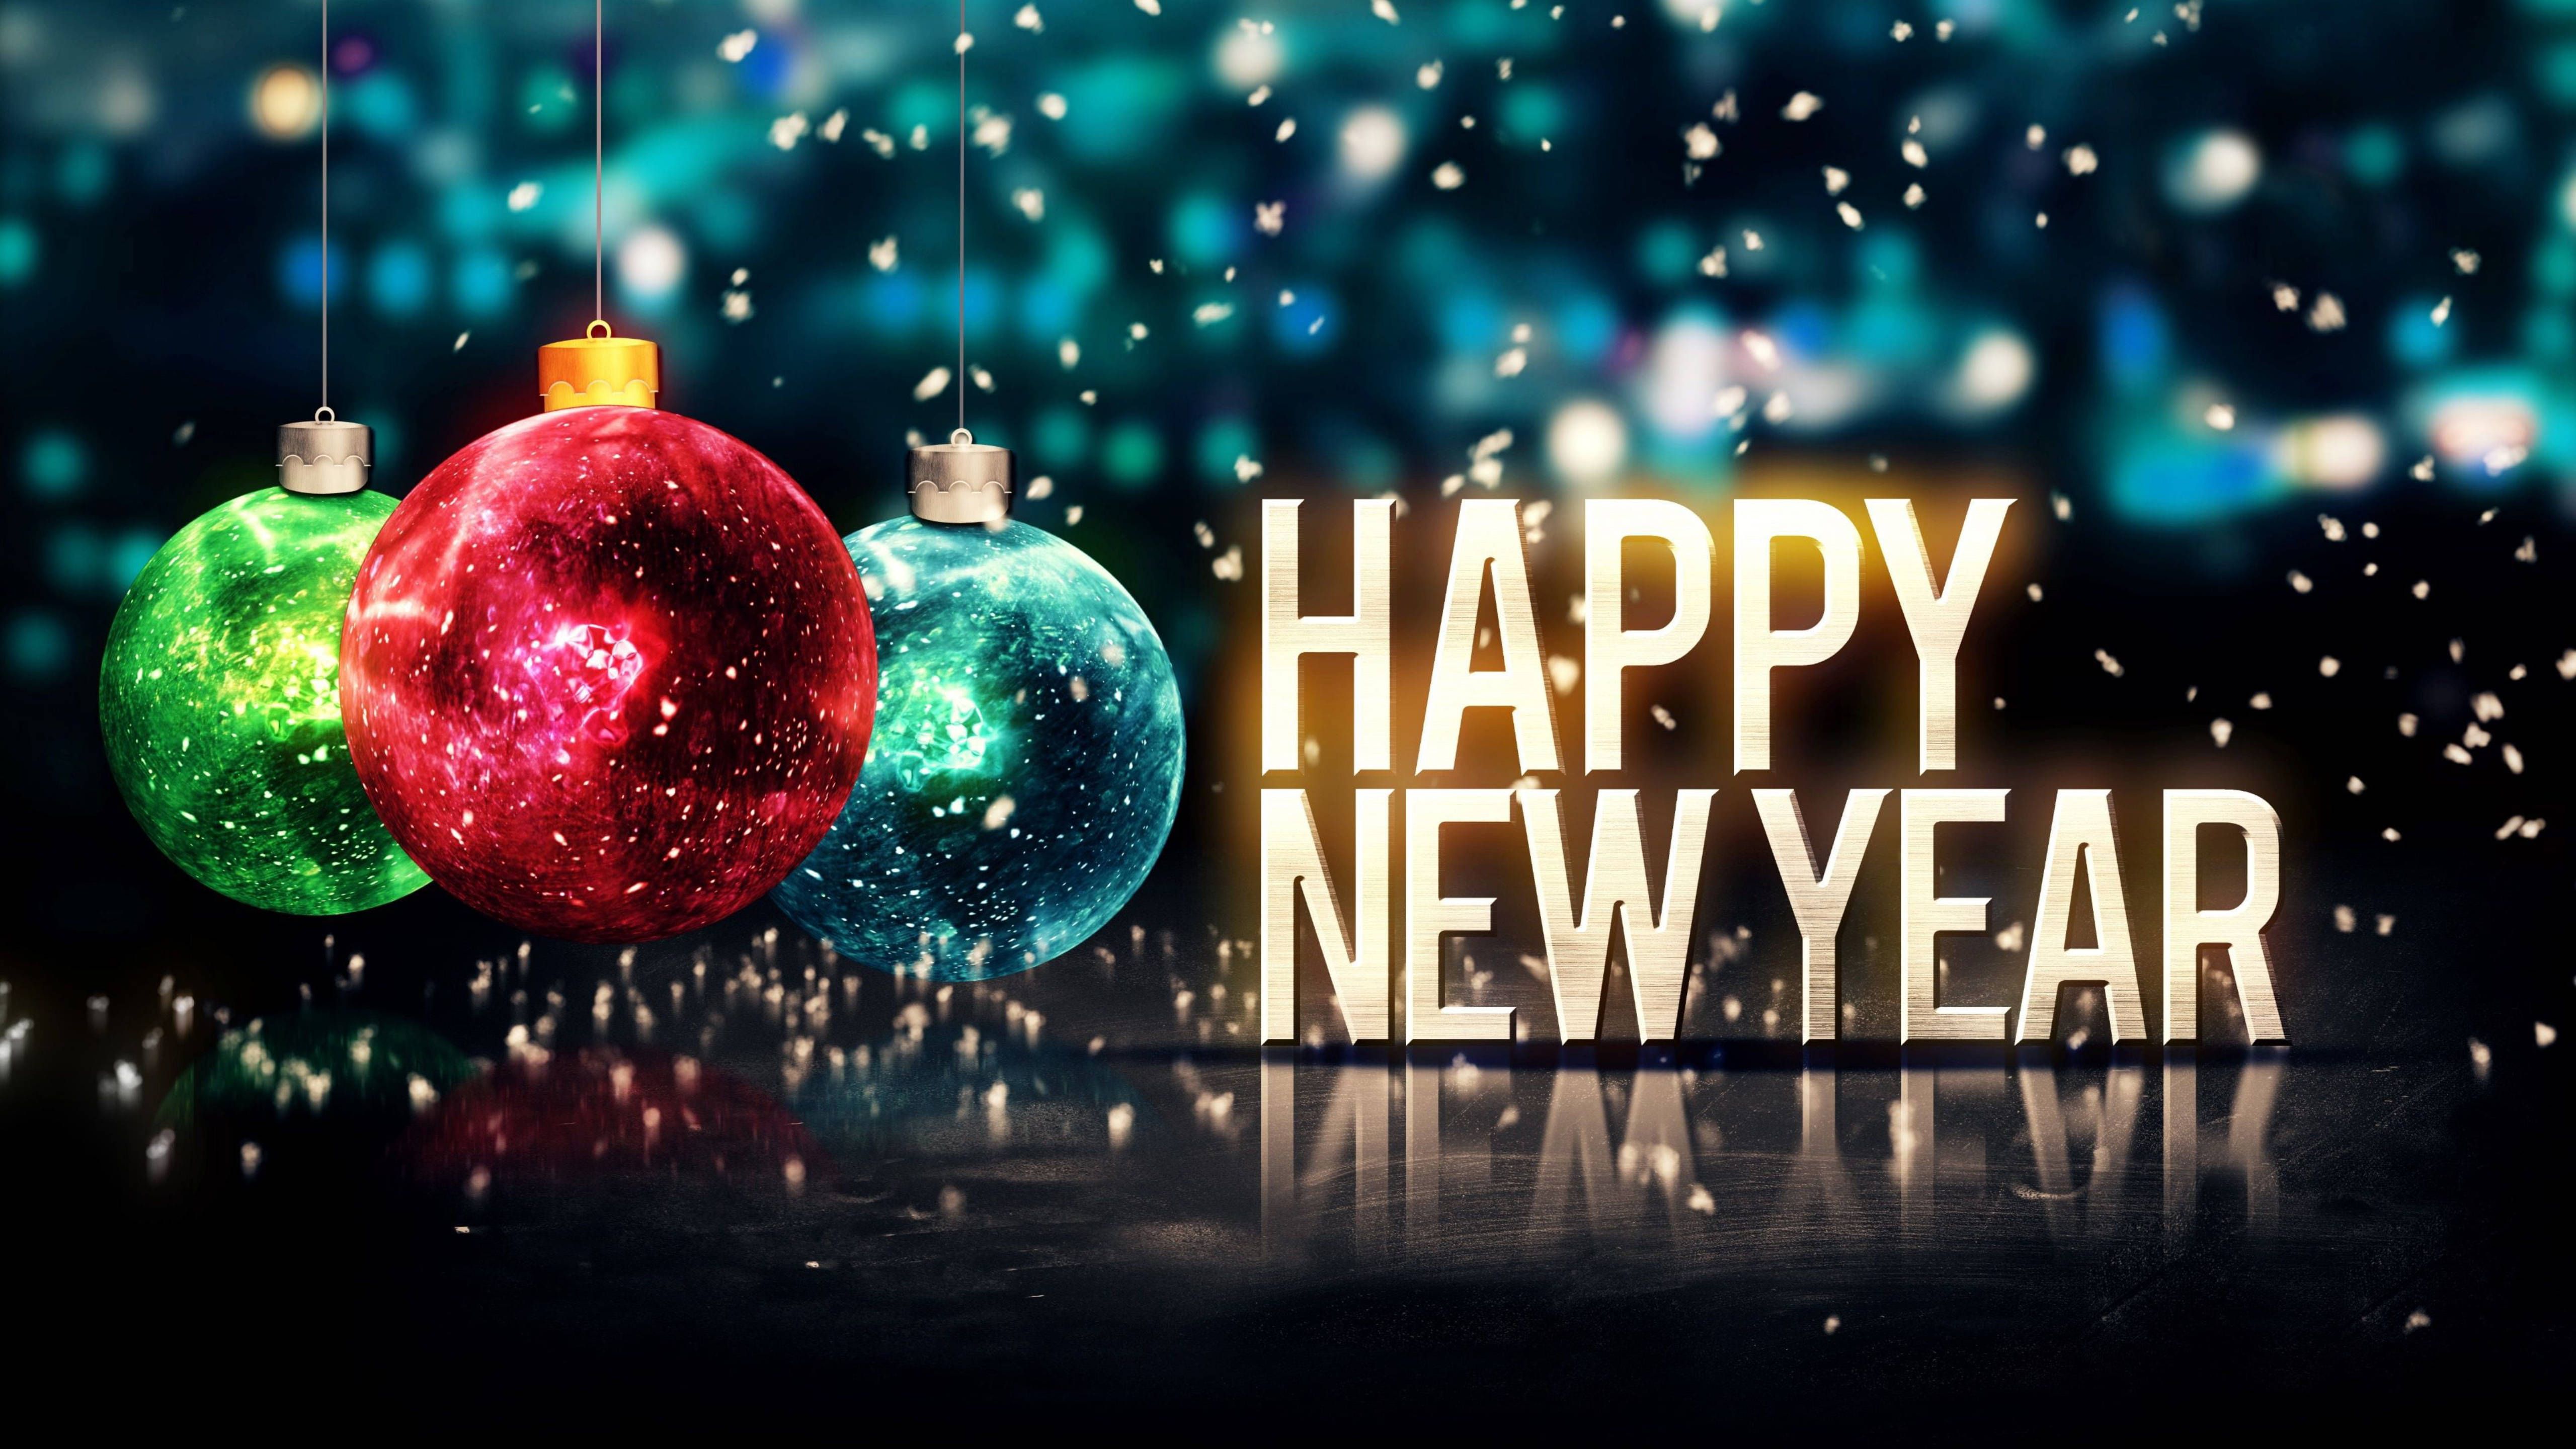 Happy New Year 3D wallpaper with shiny baubles and falling snow on a city lights background - New Year